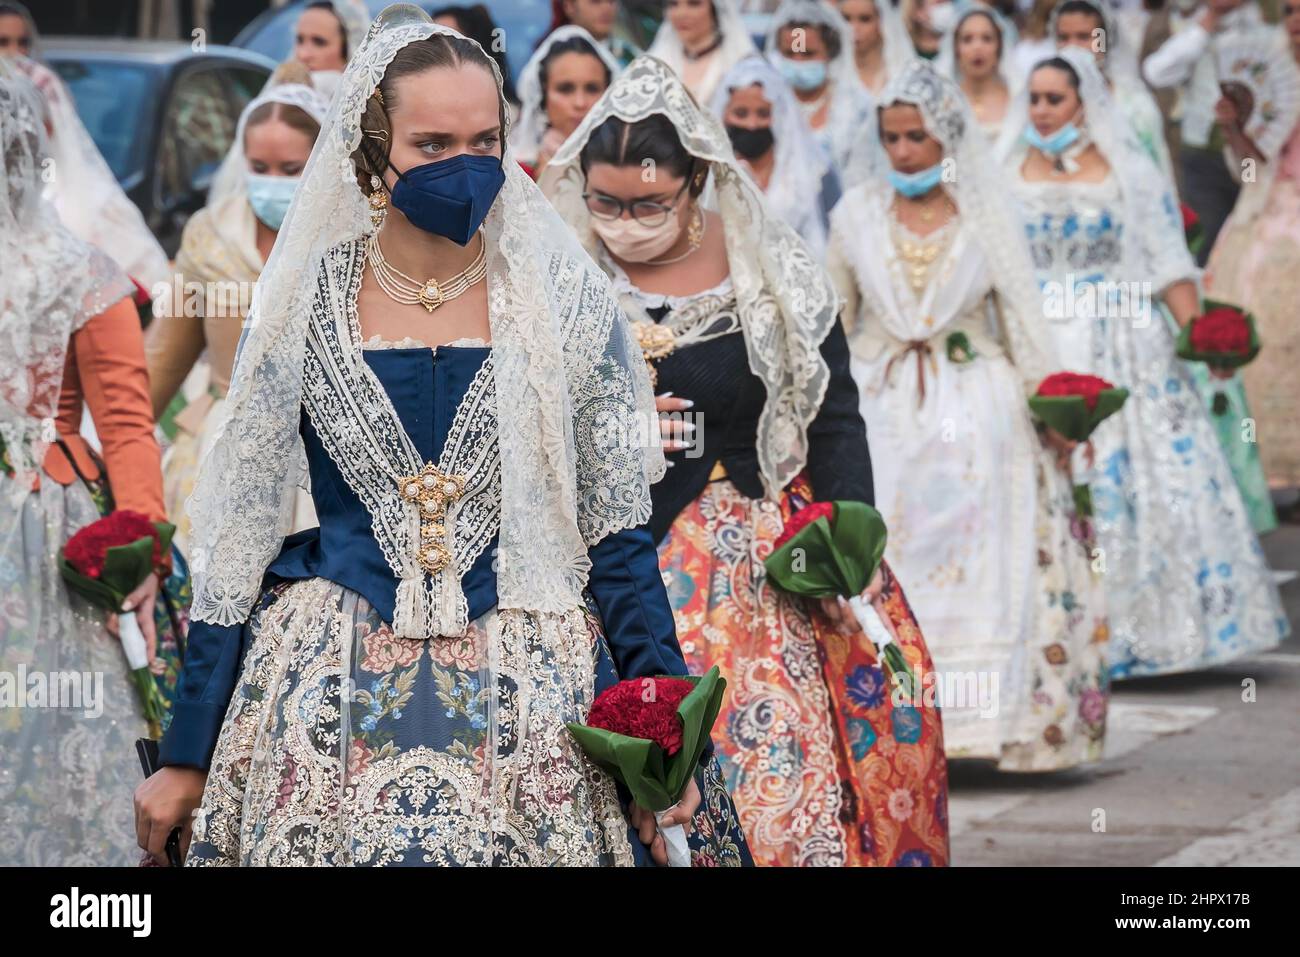 Valencia, Spain - 4 September 2021: Women with face masks for covid protection and traditional floral dresses walking for the parade at the celebratio Stock Photo